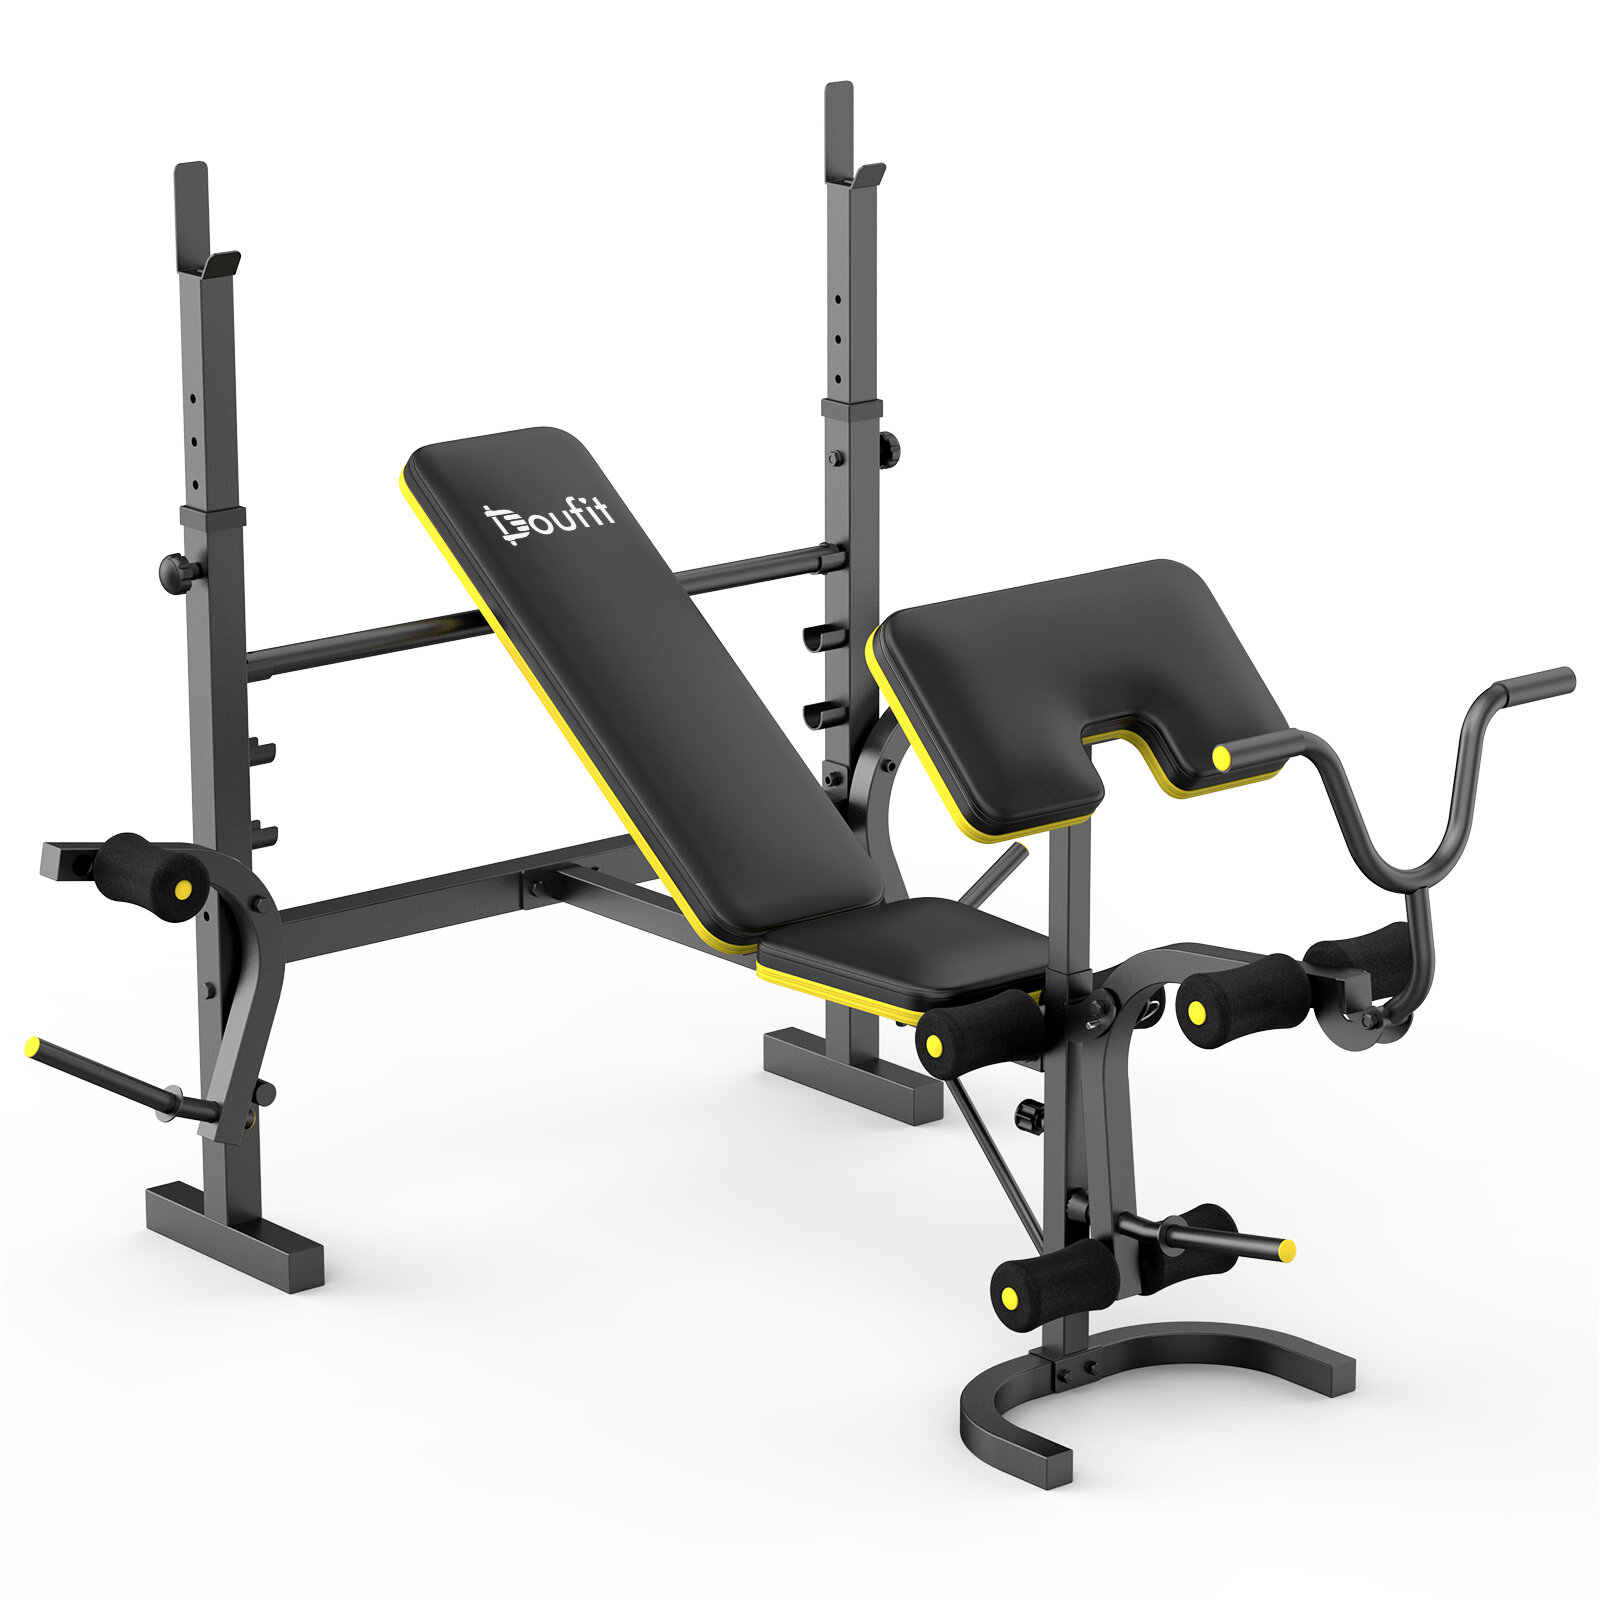 Image of Doufit WB-07 Weight Bench 270kg Load Capacity 4-in-1 Multifunctional Sit Up Benches 15 Position Adjustment Multi-role Fo